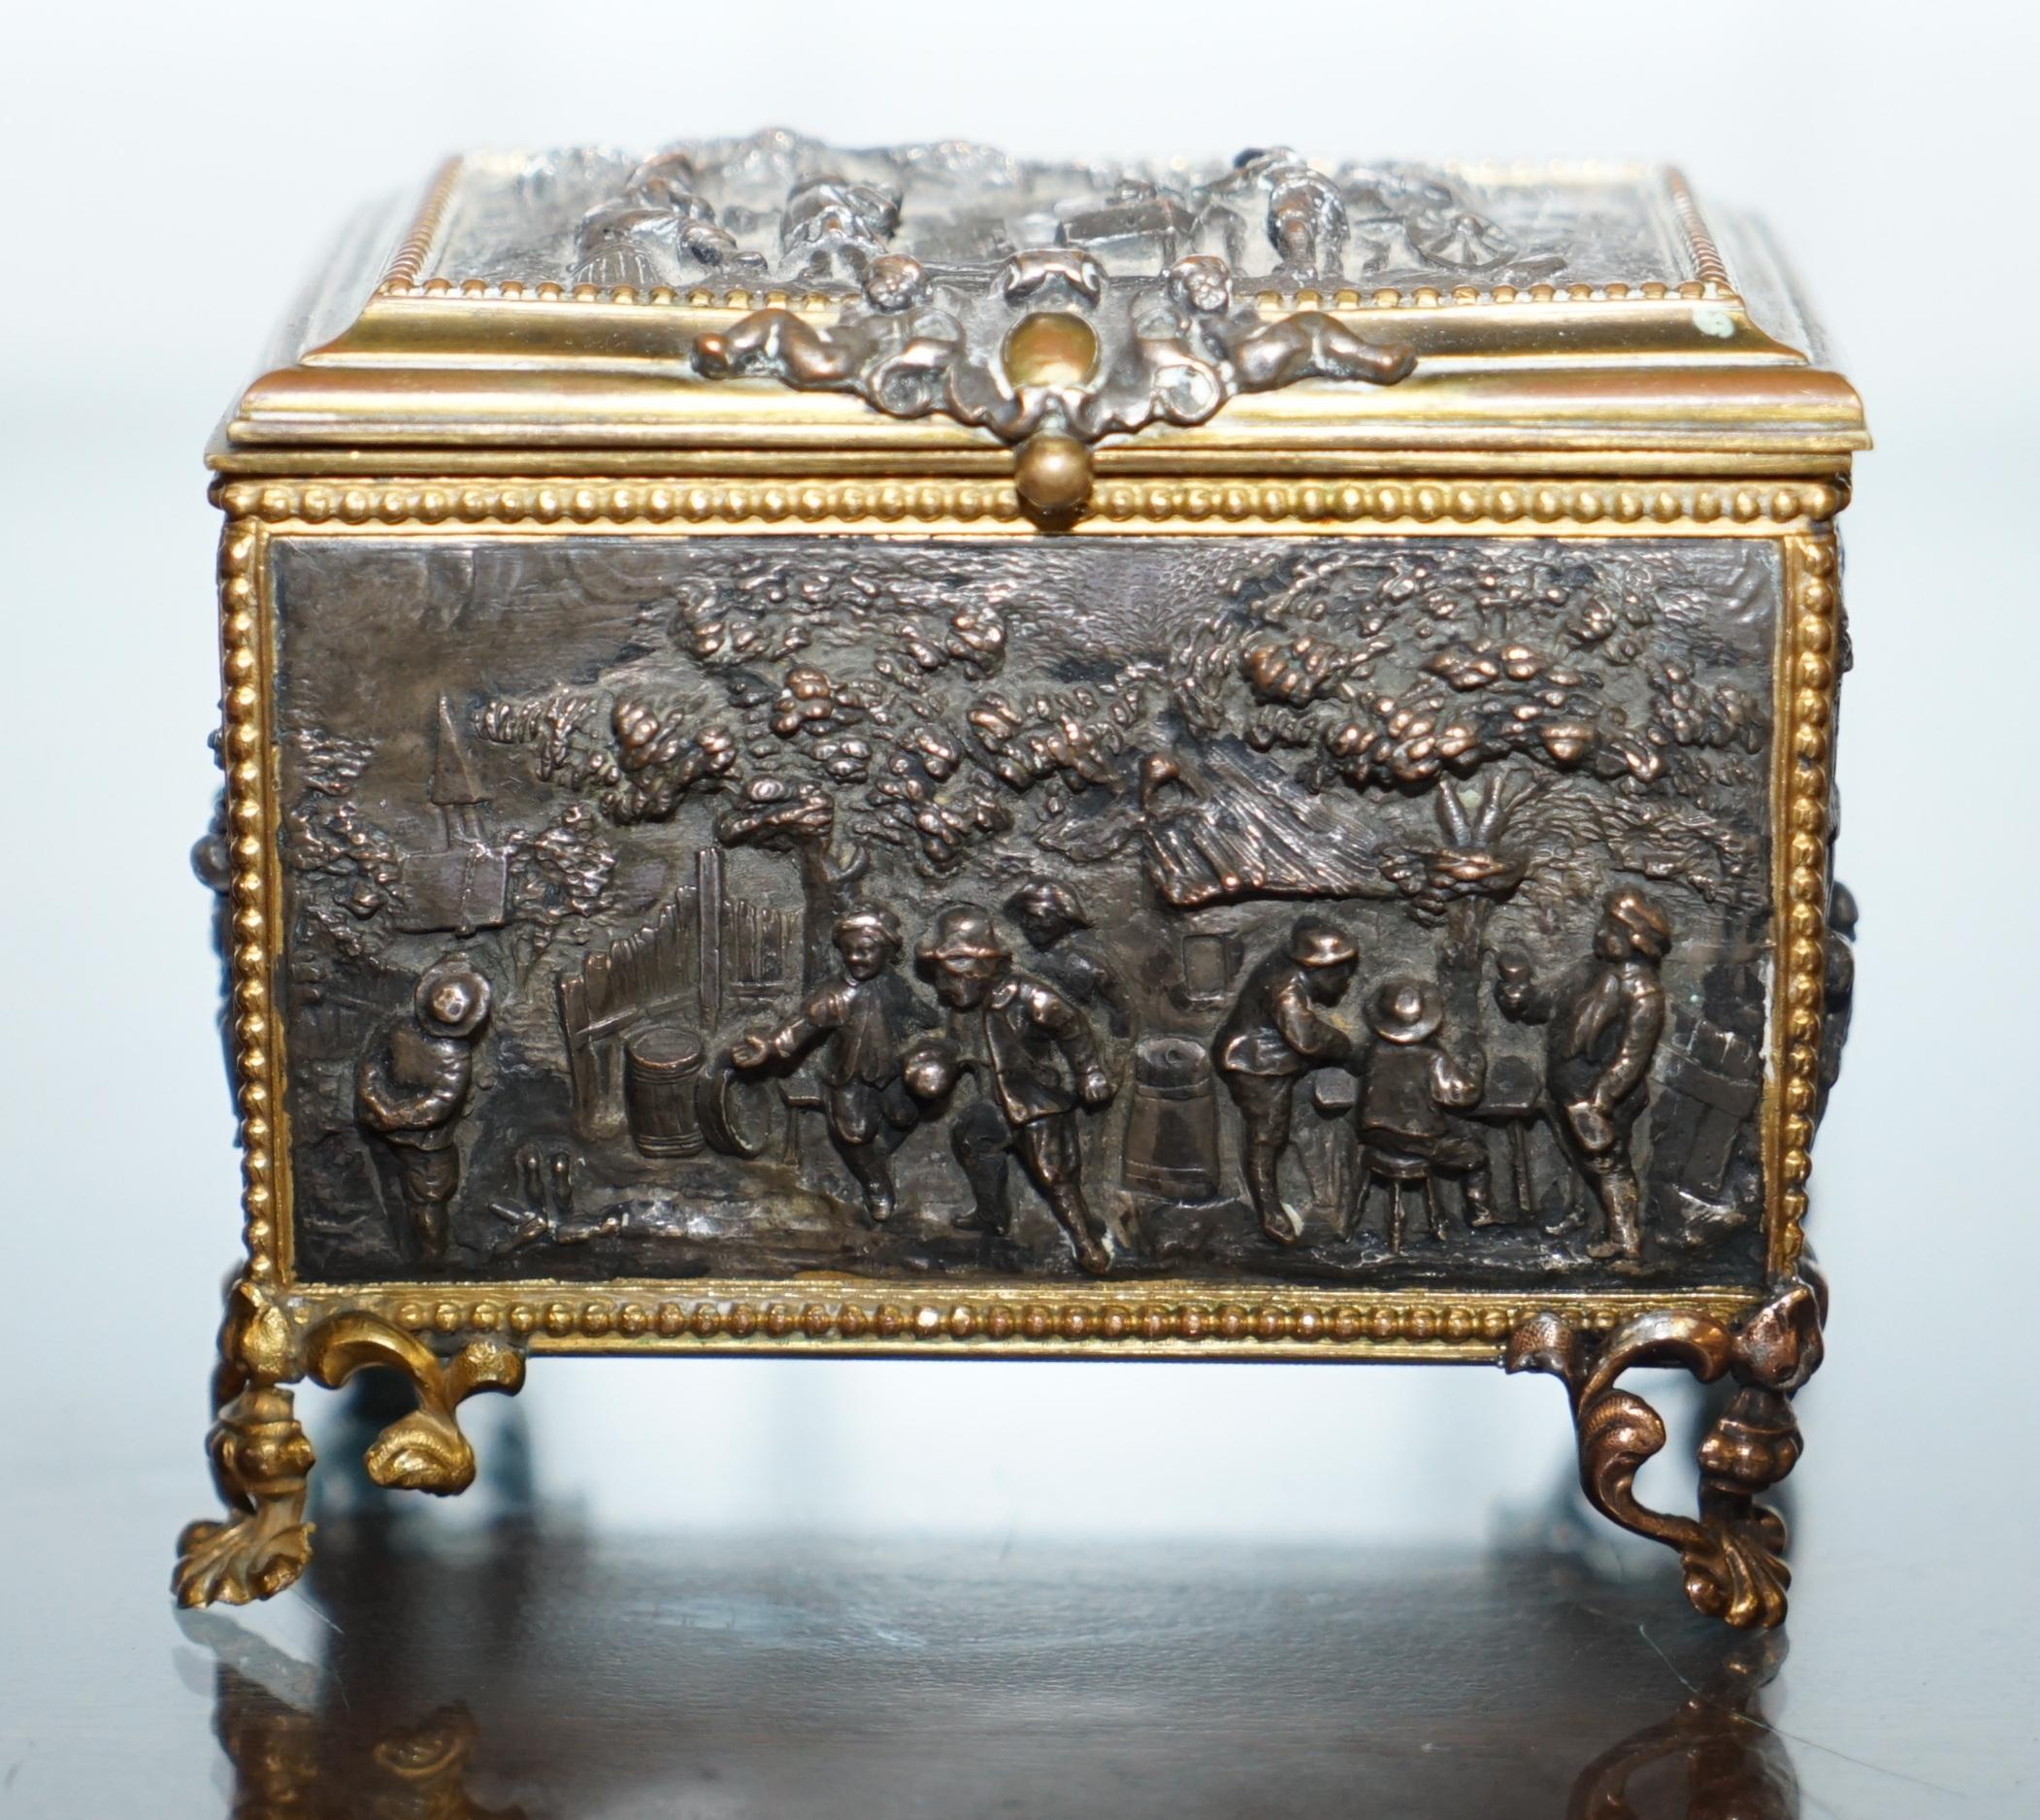 High Victorian AB Paris Signed French Bronze and Gilt Brass Jewelry Casket Box Chest circa 1880